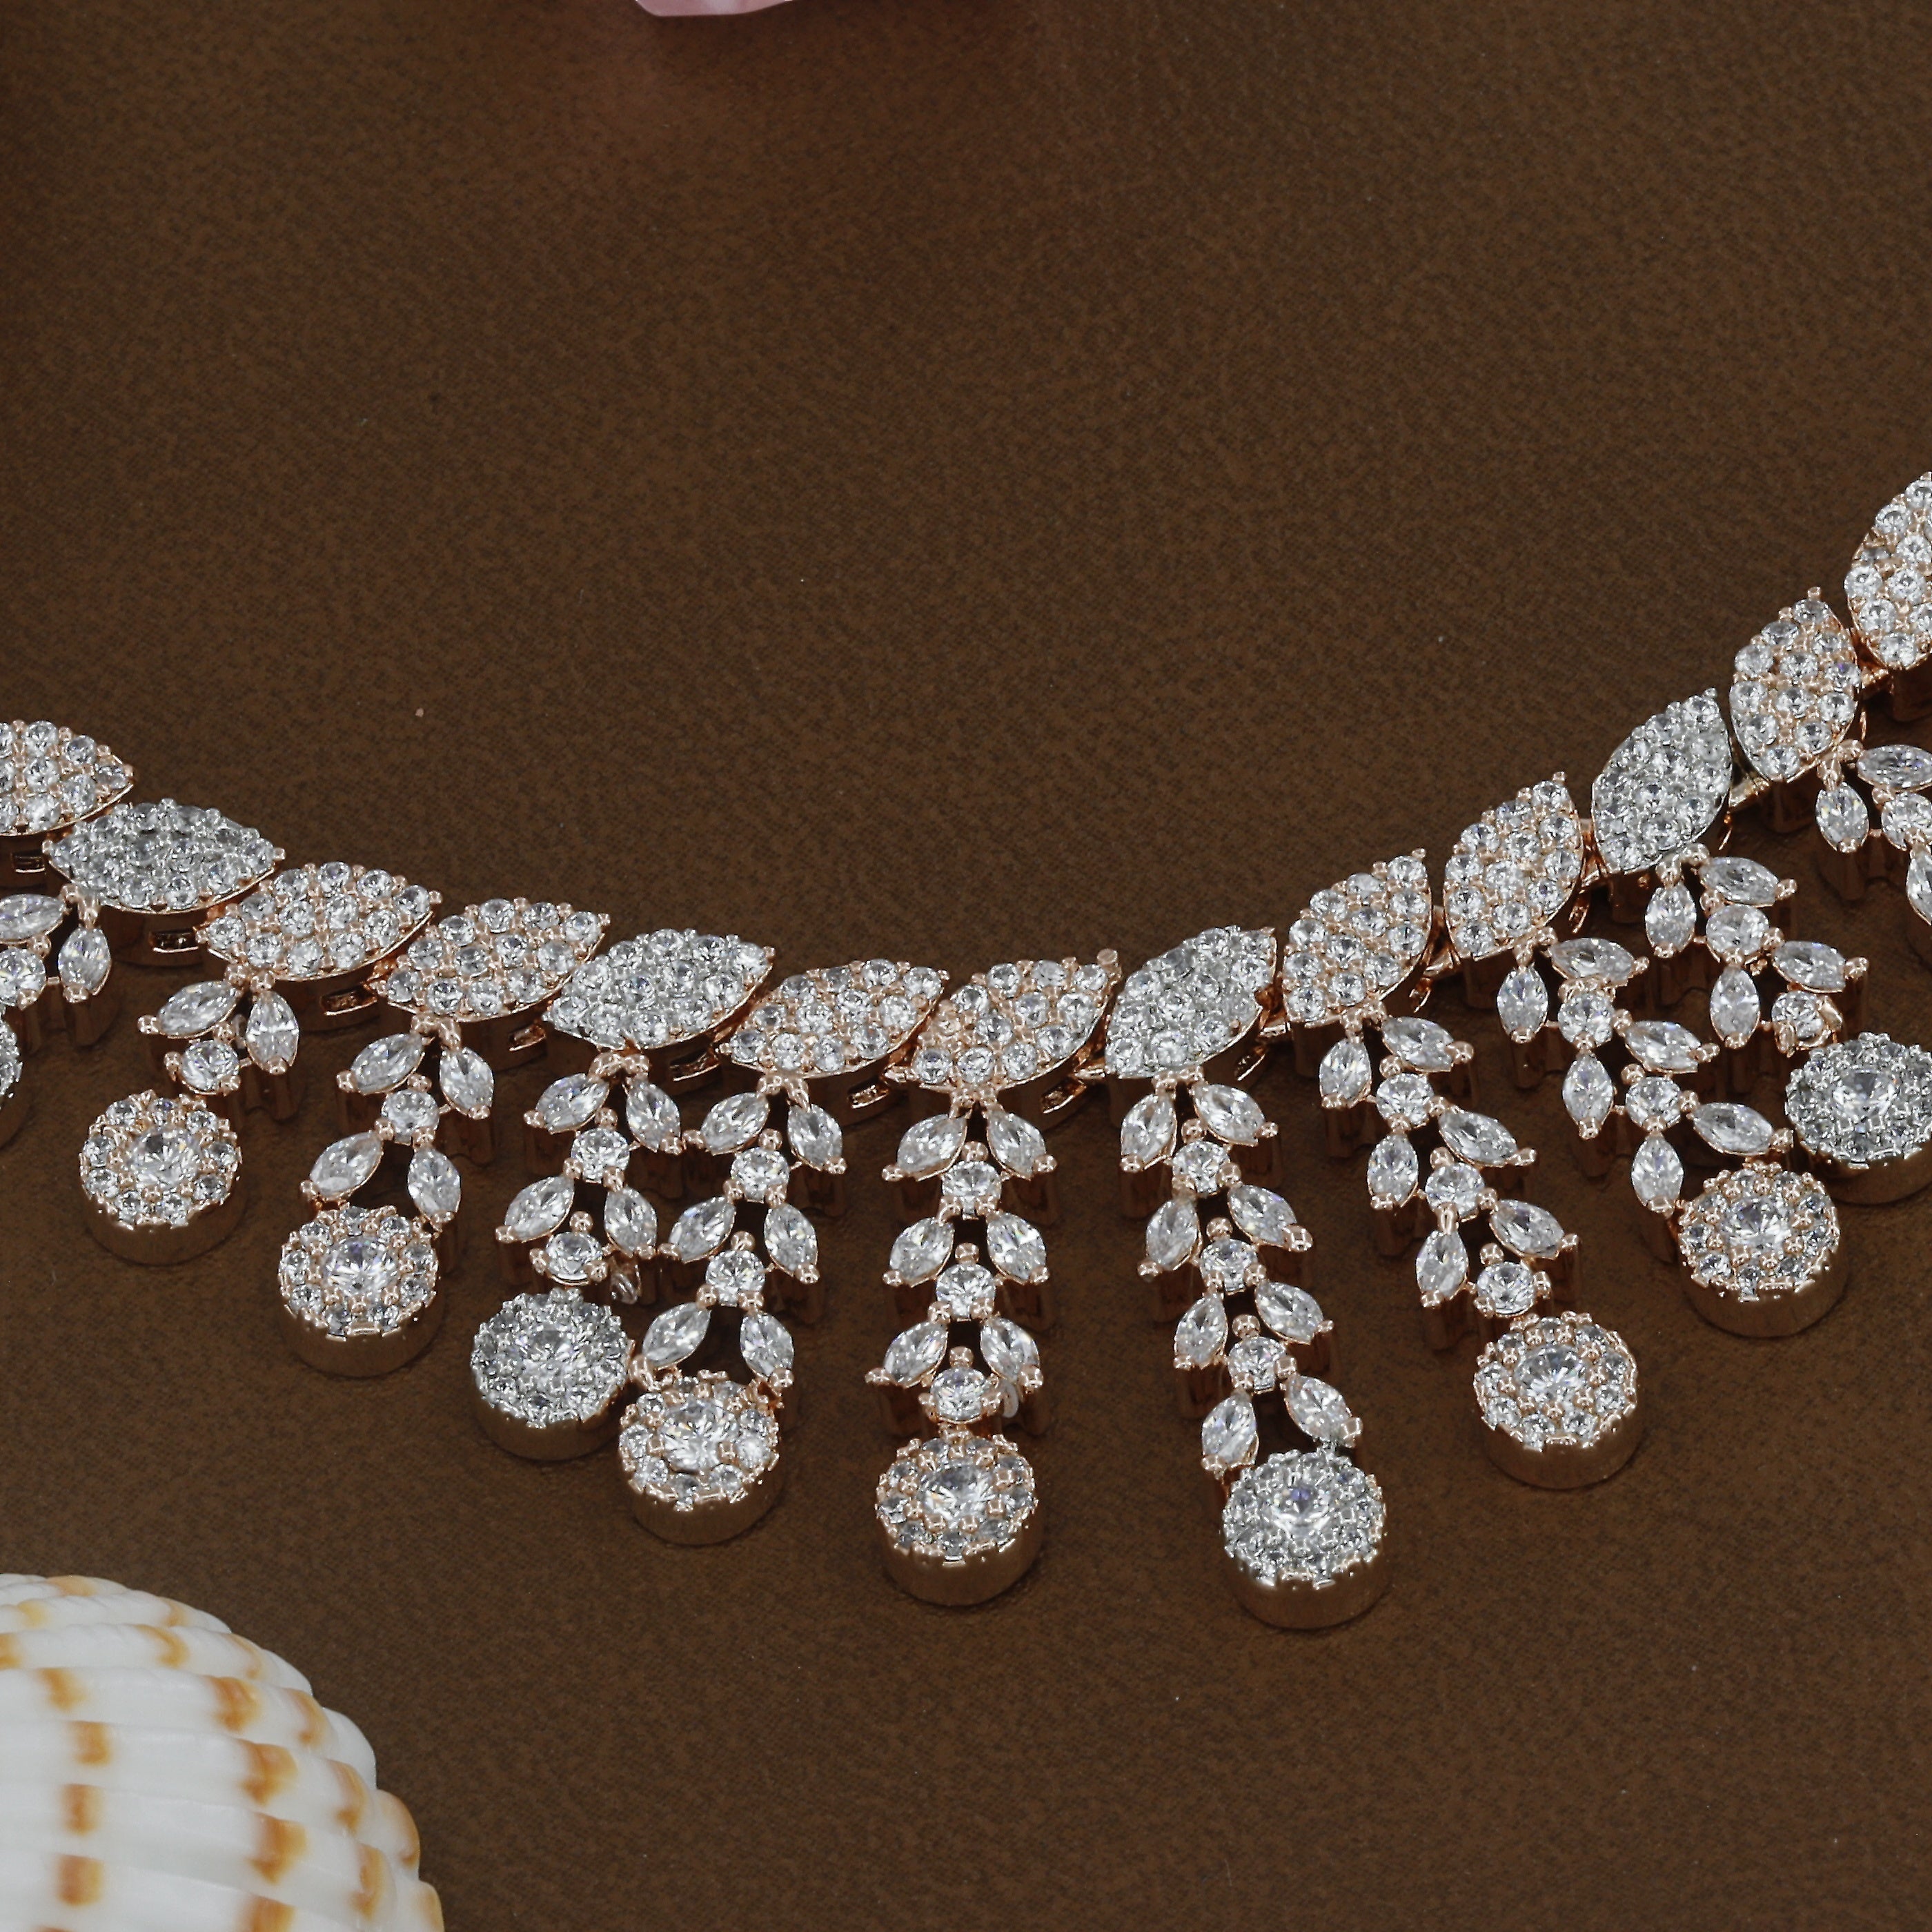 Stunning Rosepolished Diamond Necklace With Earrings